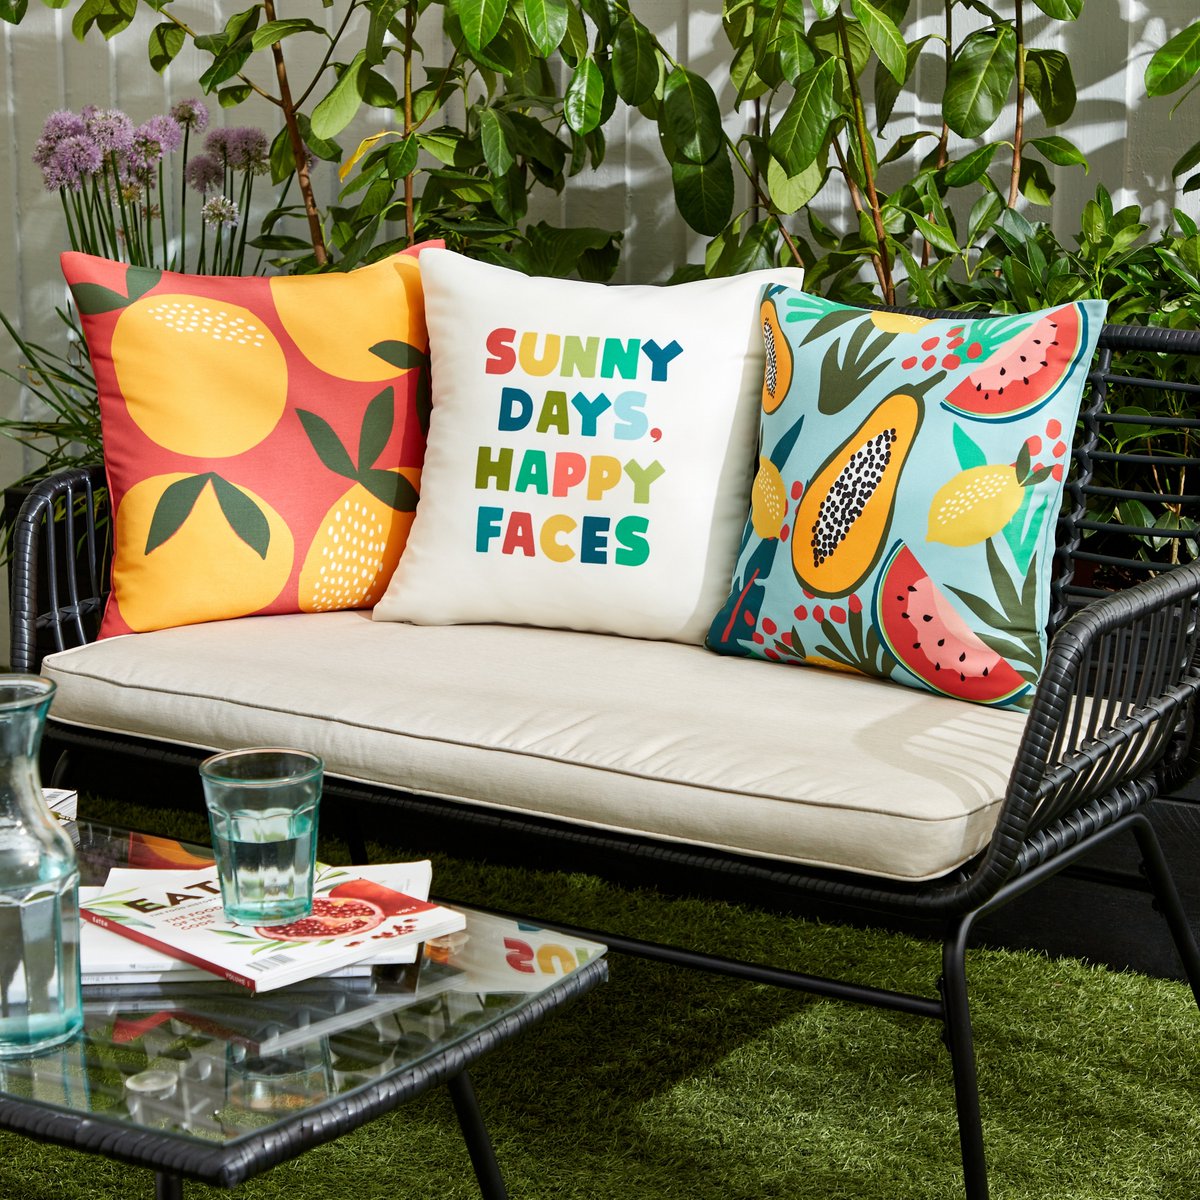 Stay cool this summer with #SunshineSavings at Dunelm! ☀️💨

Upgrade your workspace or home with stylish fans starting from just £5. Don't miss out on this amazing deal! 😎🏢

Shop now: tidd.ly/3PKn86h

#StayCool #Dunelm 🌬️🖤